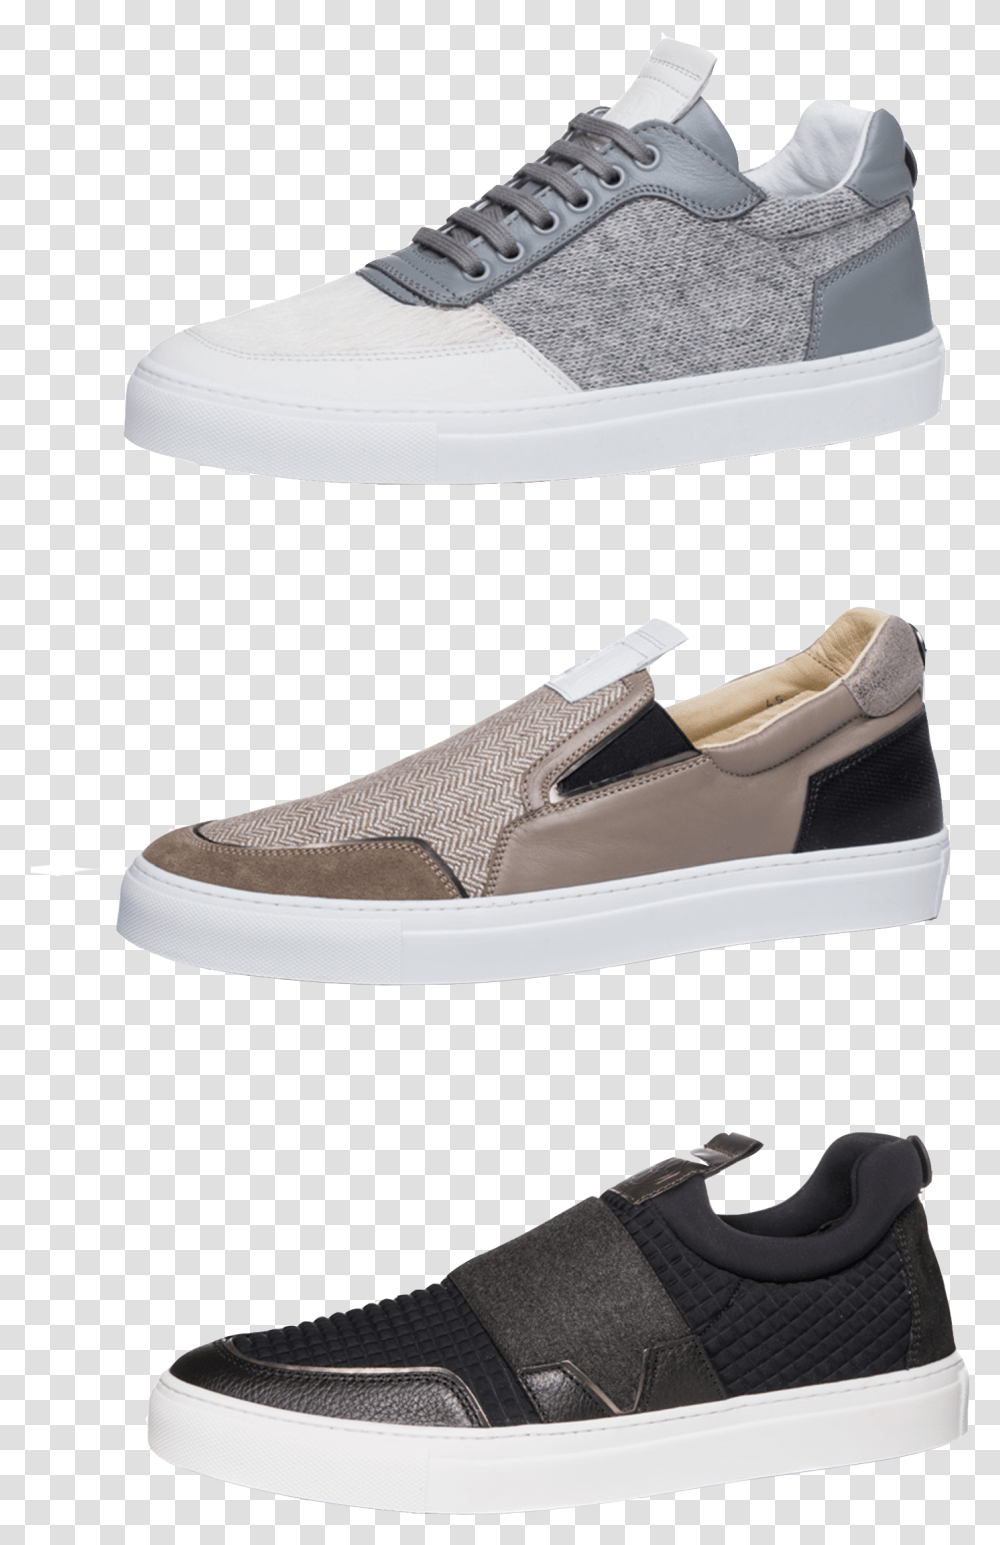 Coachella Shoes For Guys Download Coachella Shoes For Guys, Footwear, Apparel, Sneaker Transparent Png